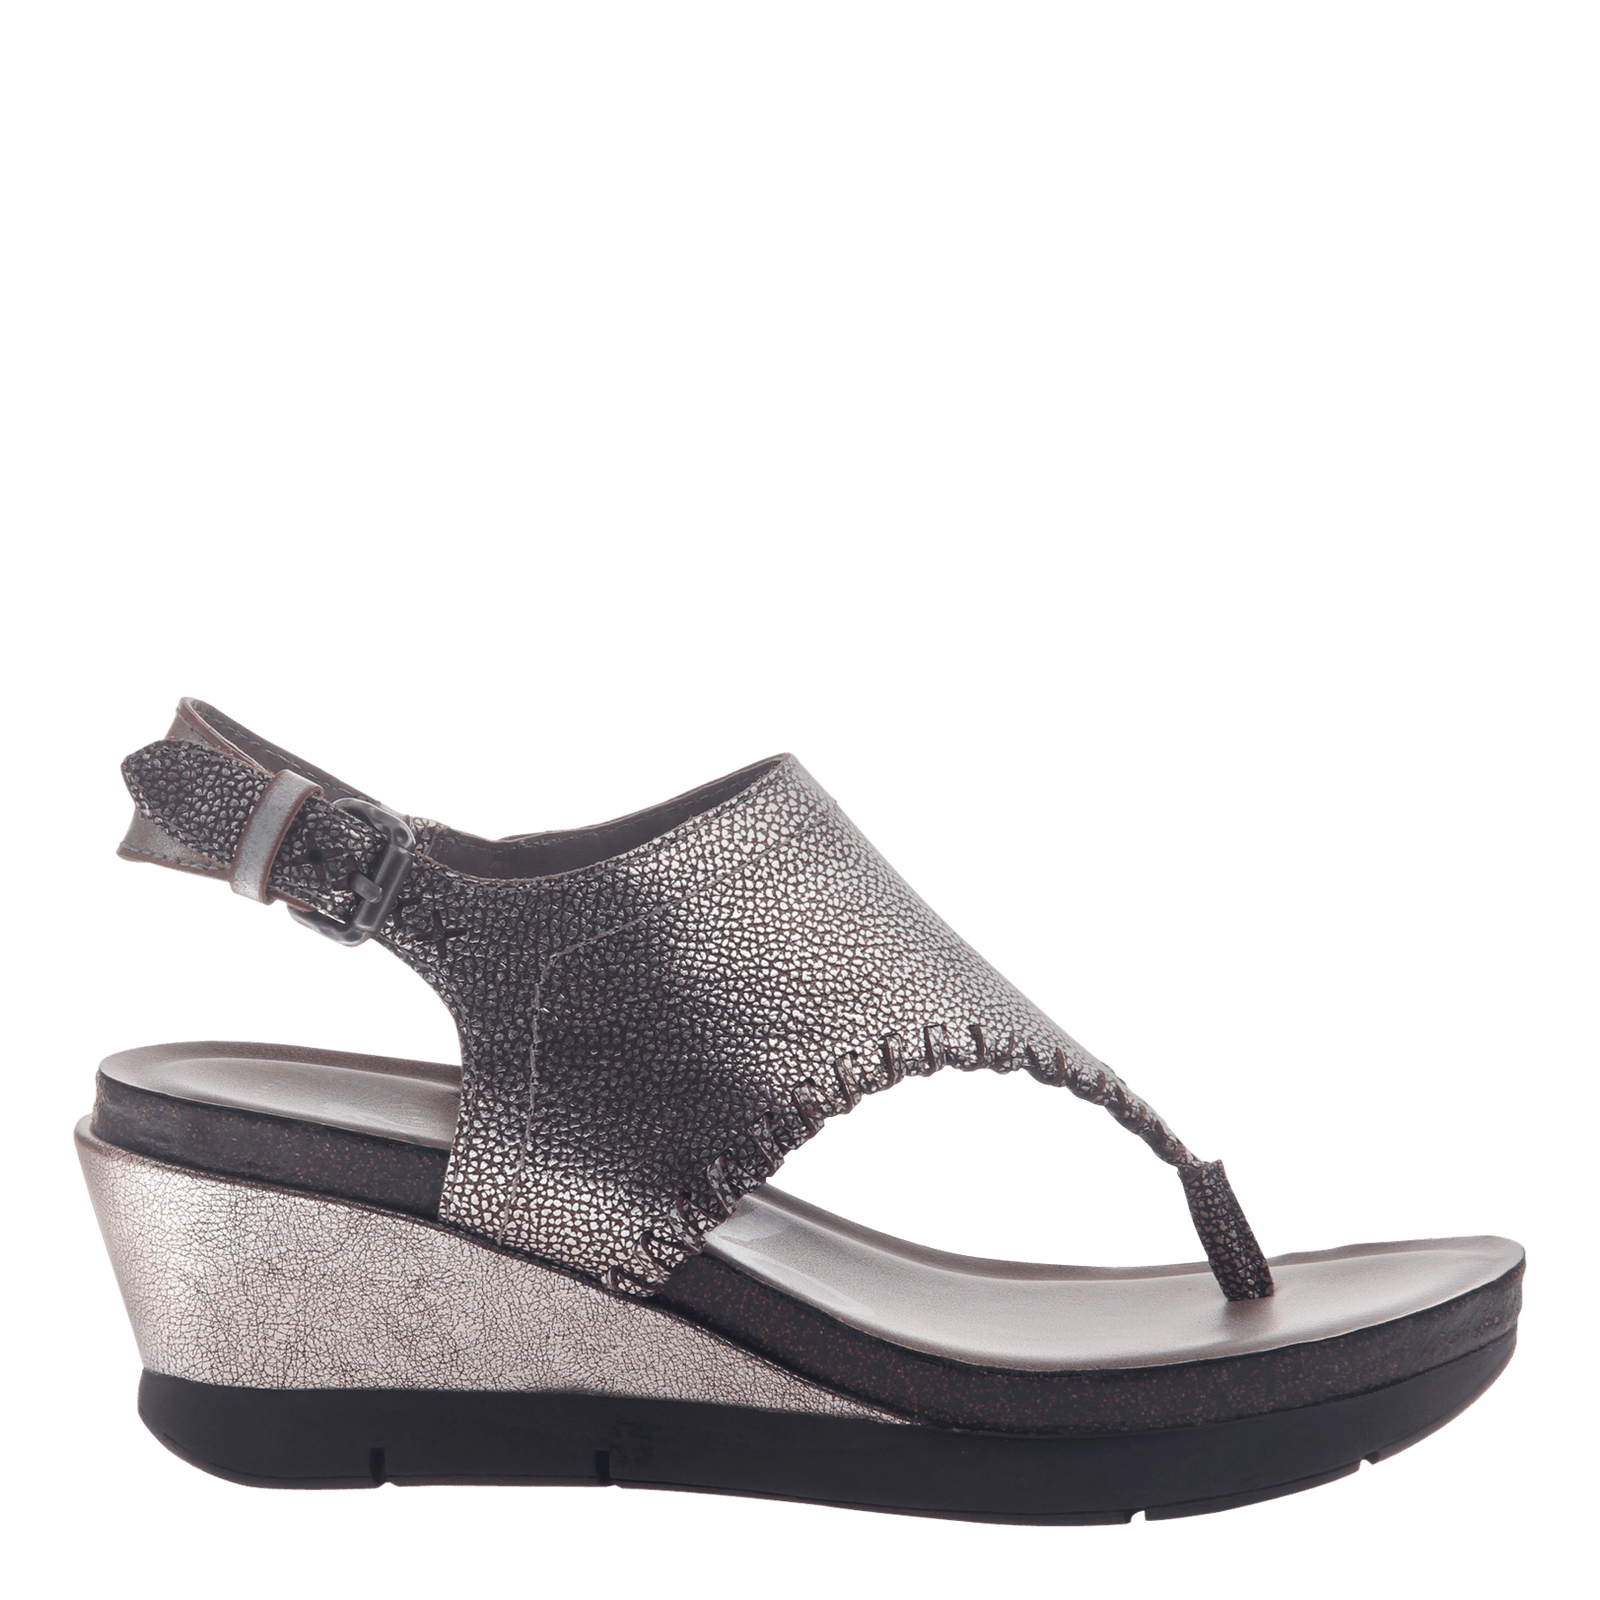 Travel Shoes for Women | Comfort & Style | OTBT Globe Trotter - OTBT shoes